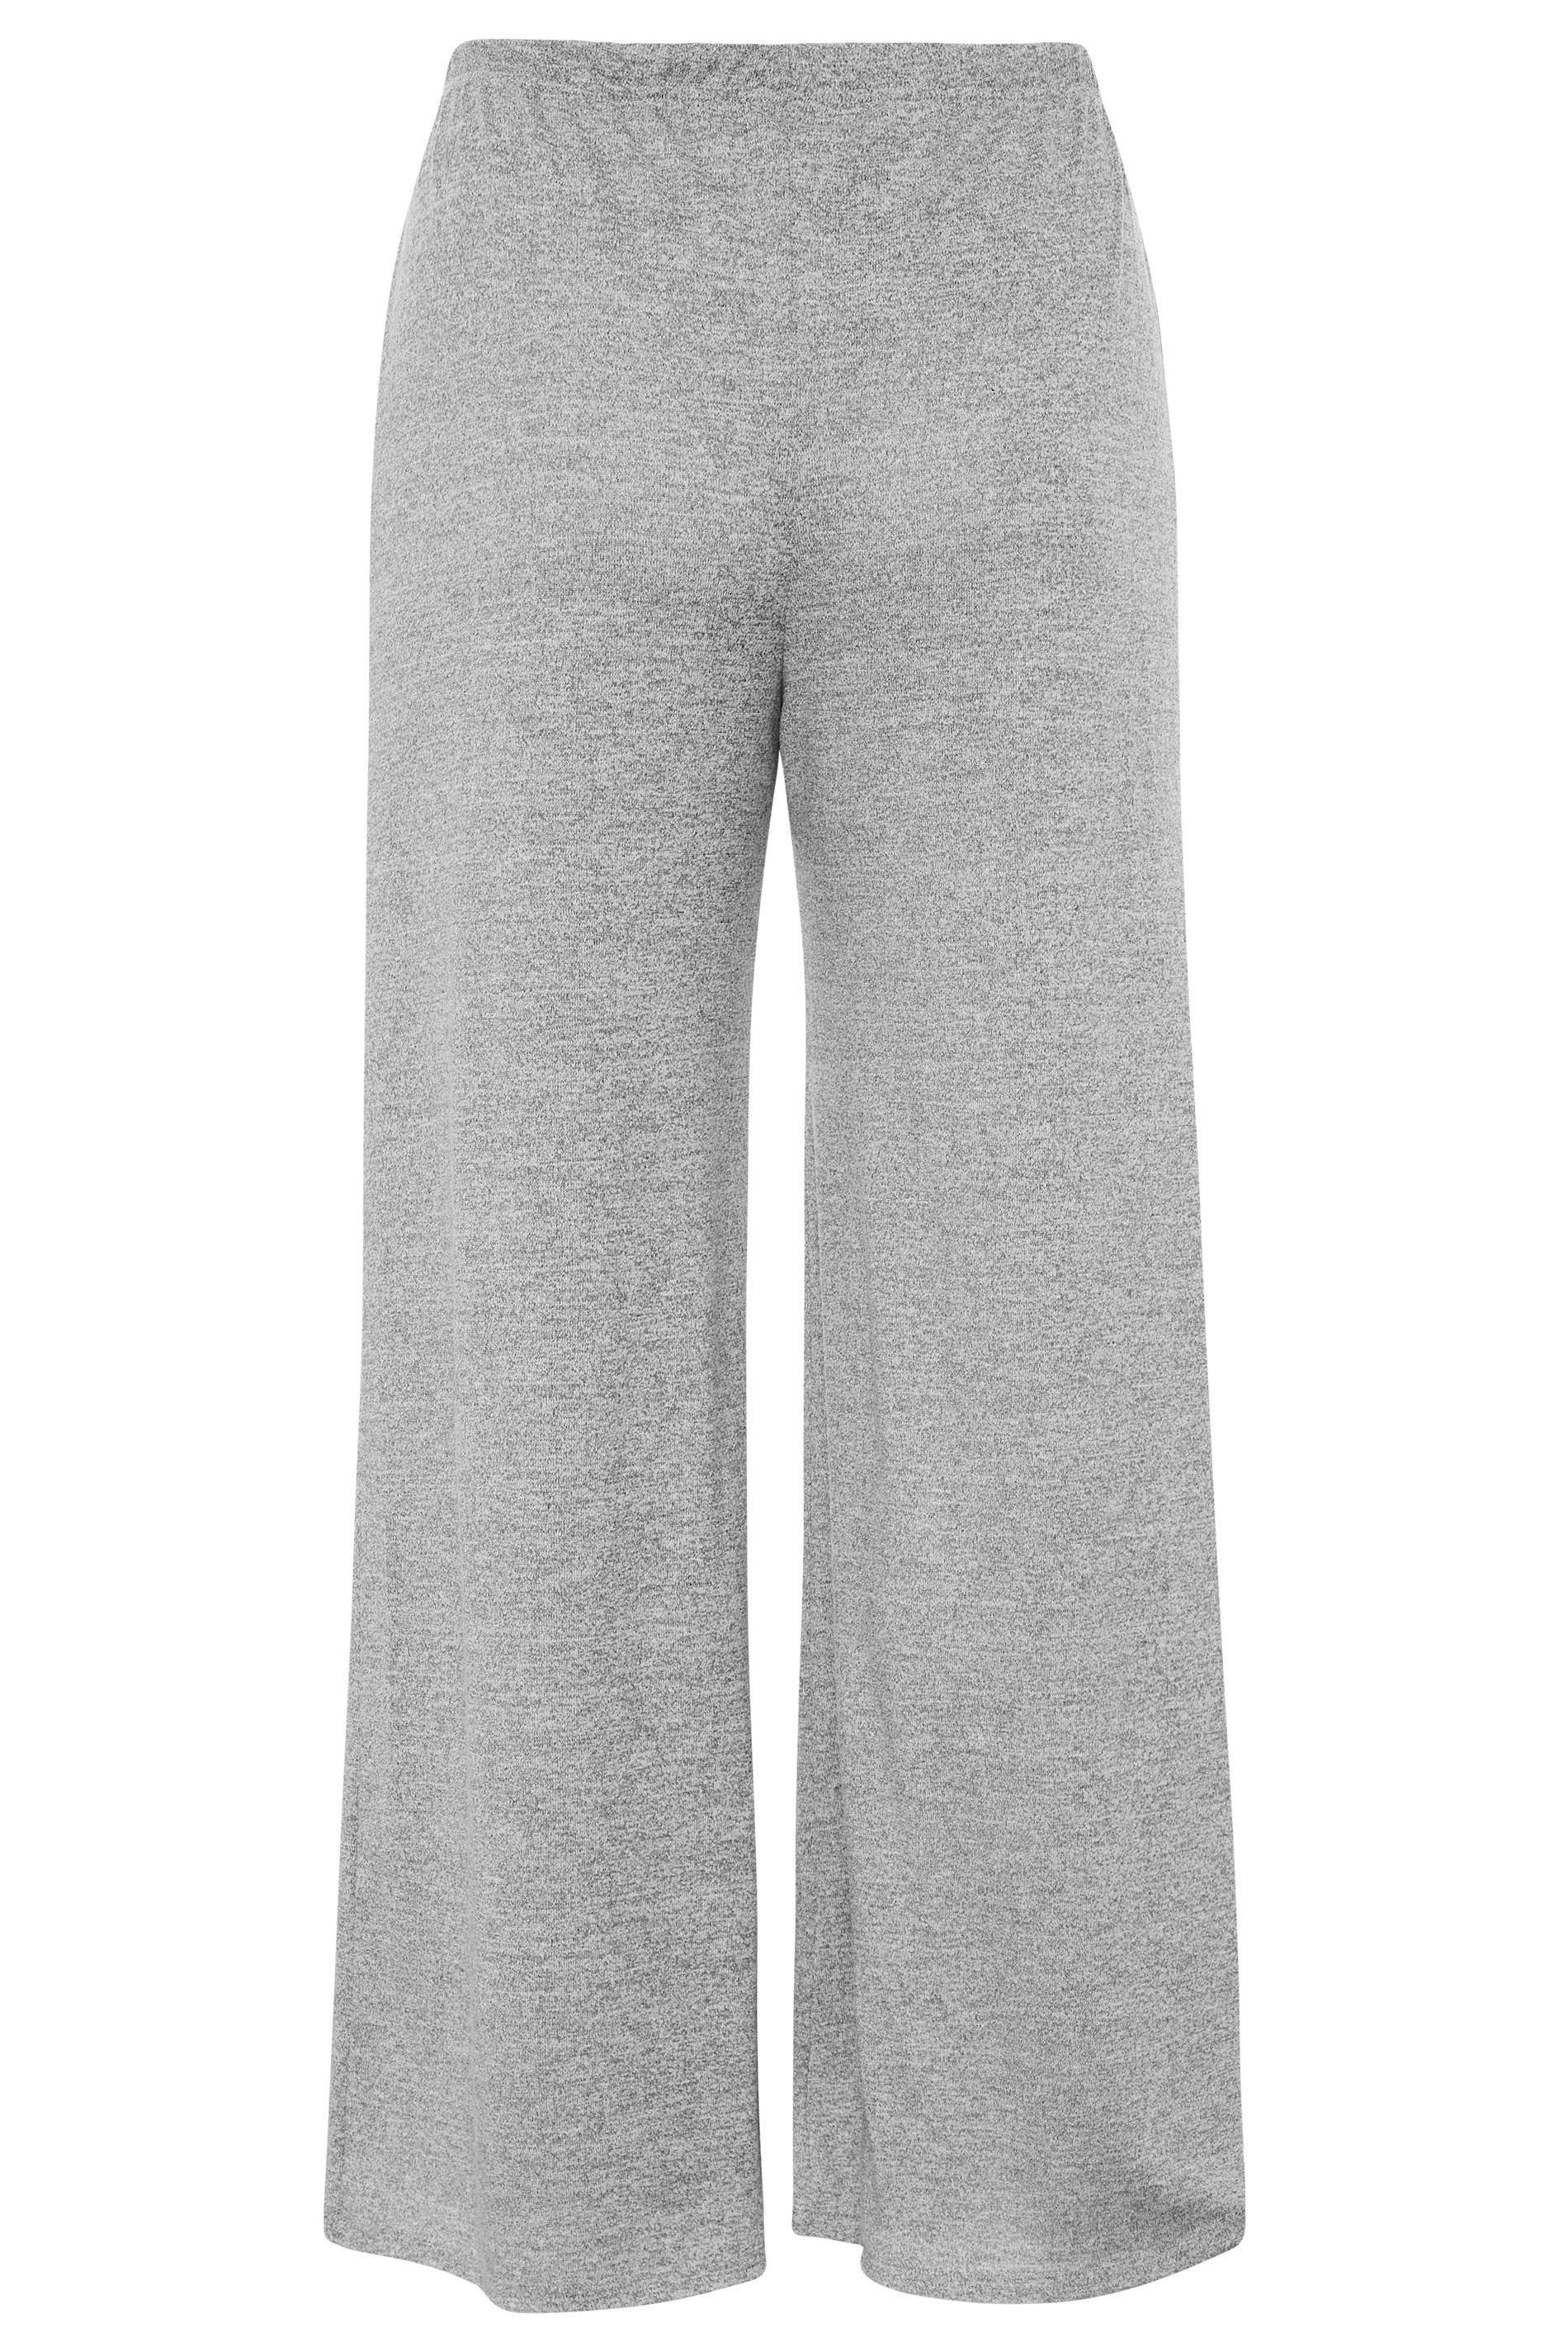 LIMITED COLLECTION Grey Wide Leg Trousers | Yours Clothing